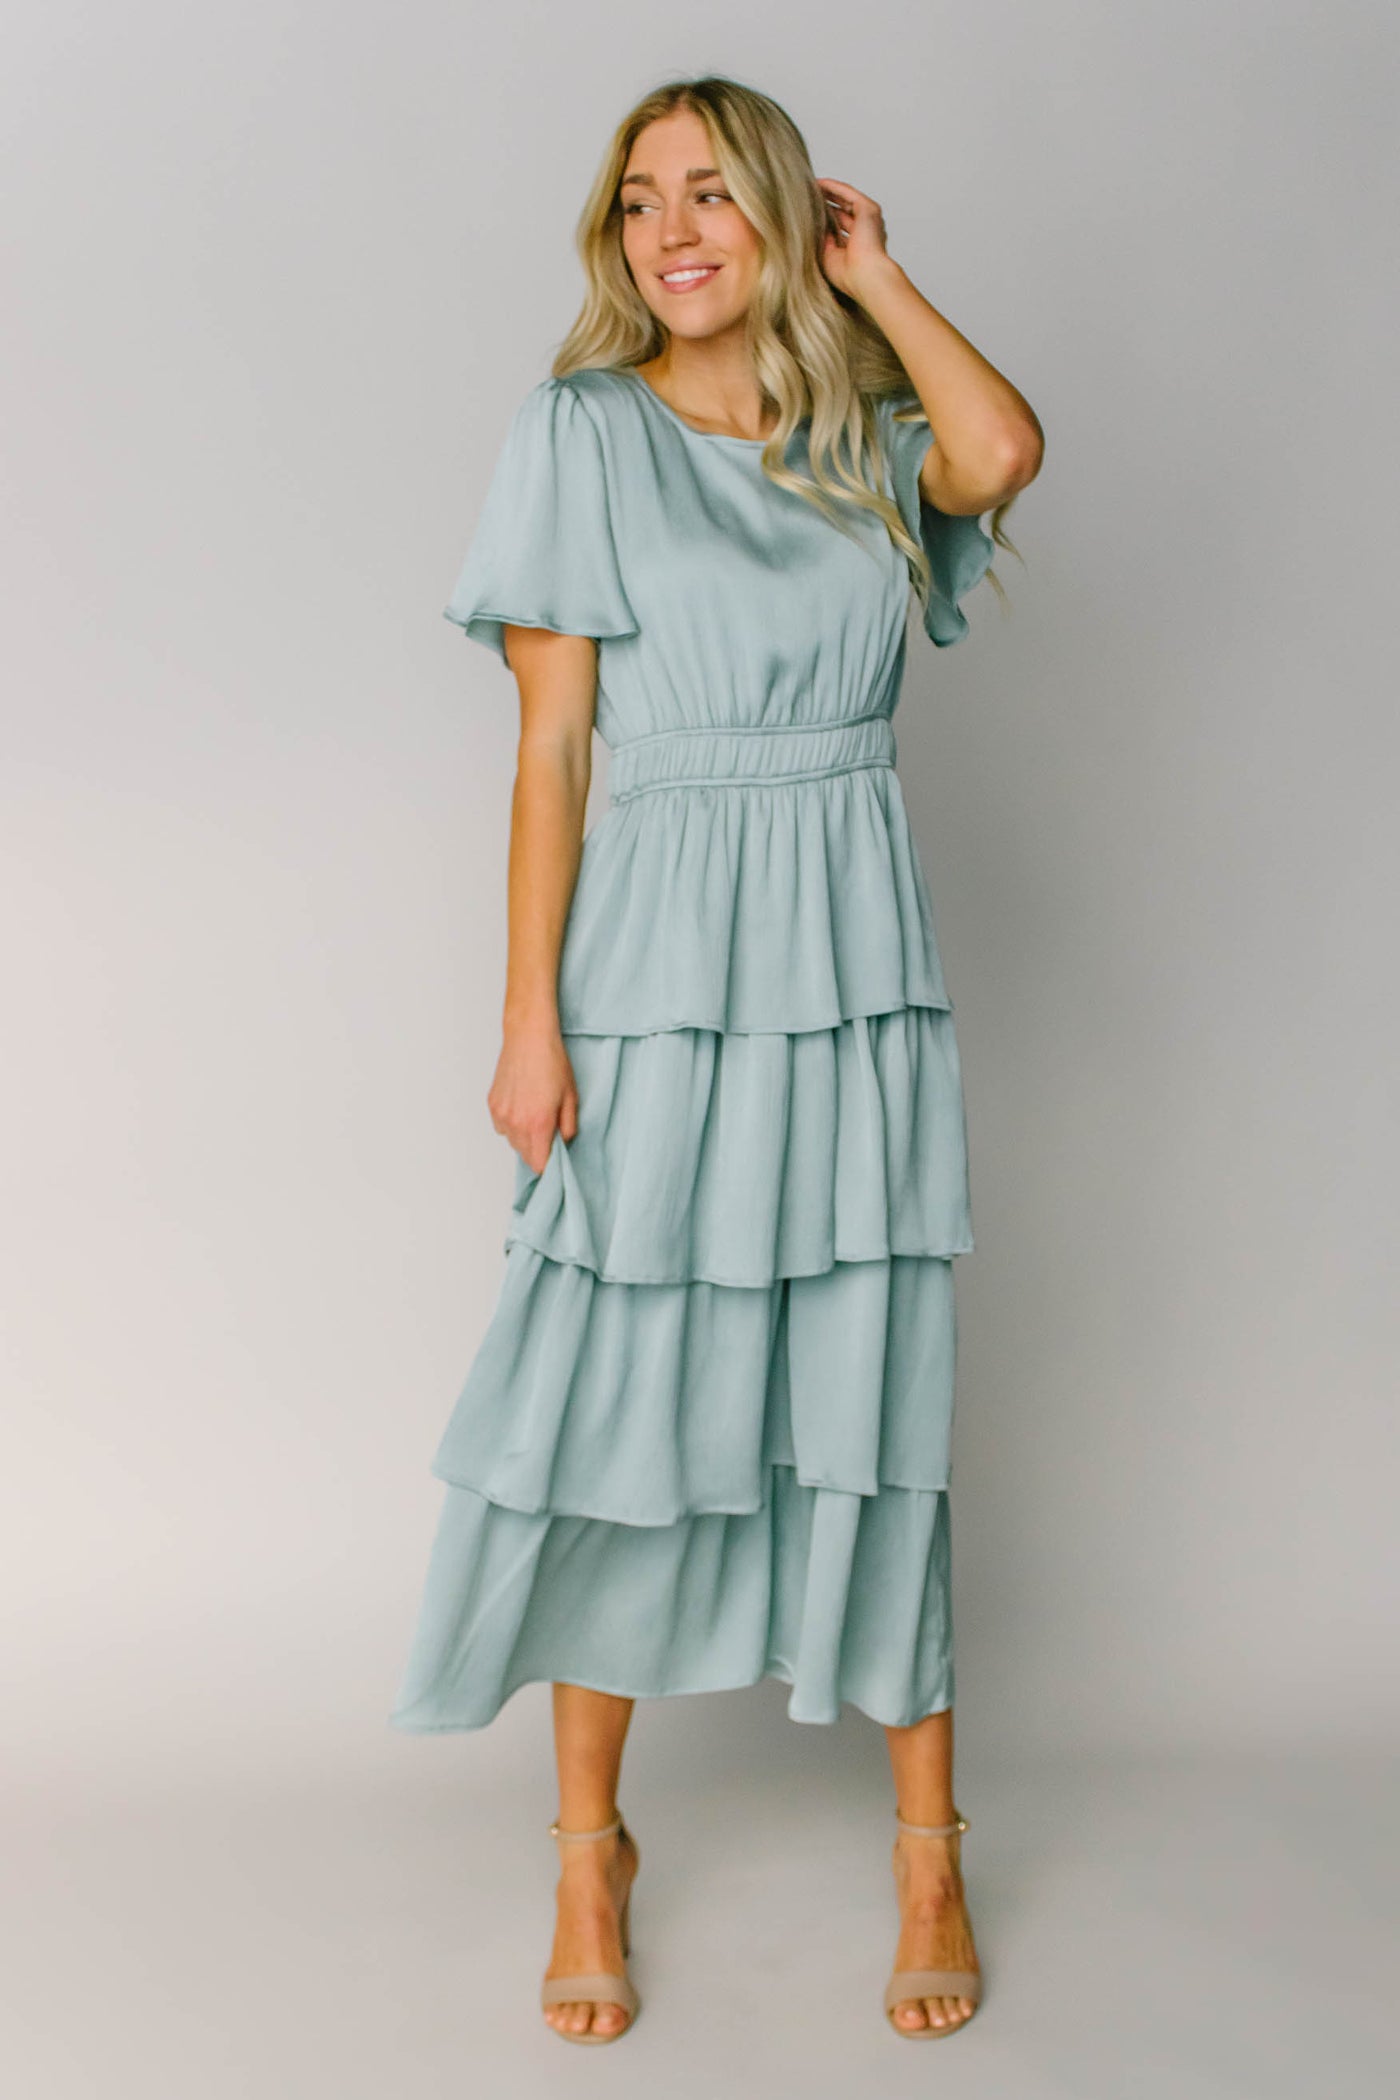 A modest bridesmaid dress made out of a silky light blue fabric with flutter sleeves, layered tiers, and a defined waist.